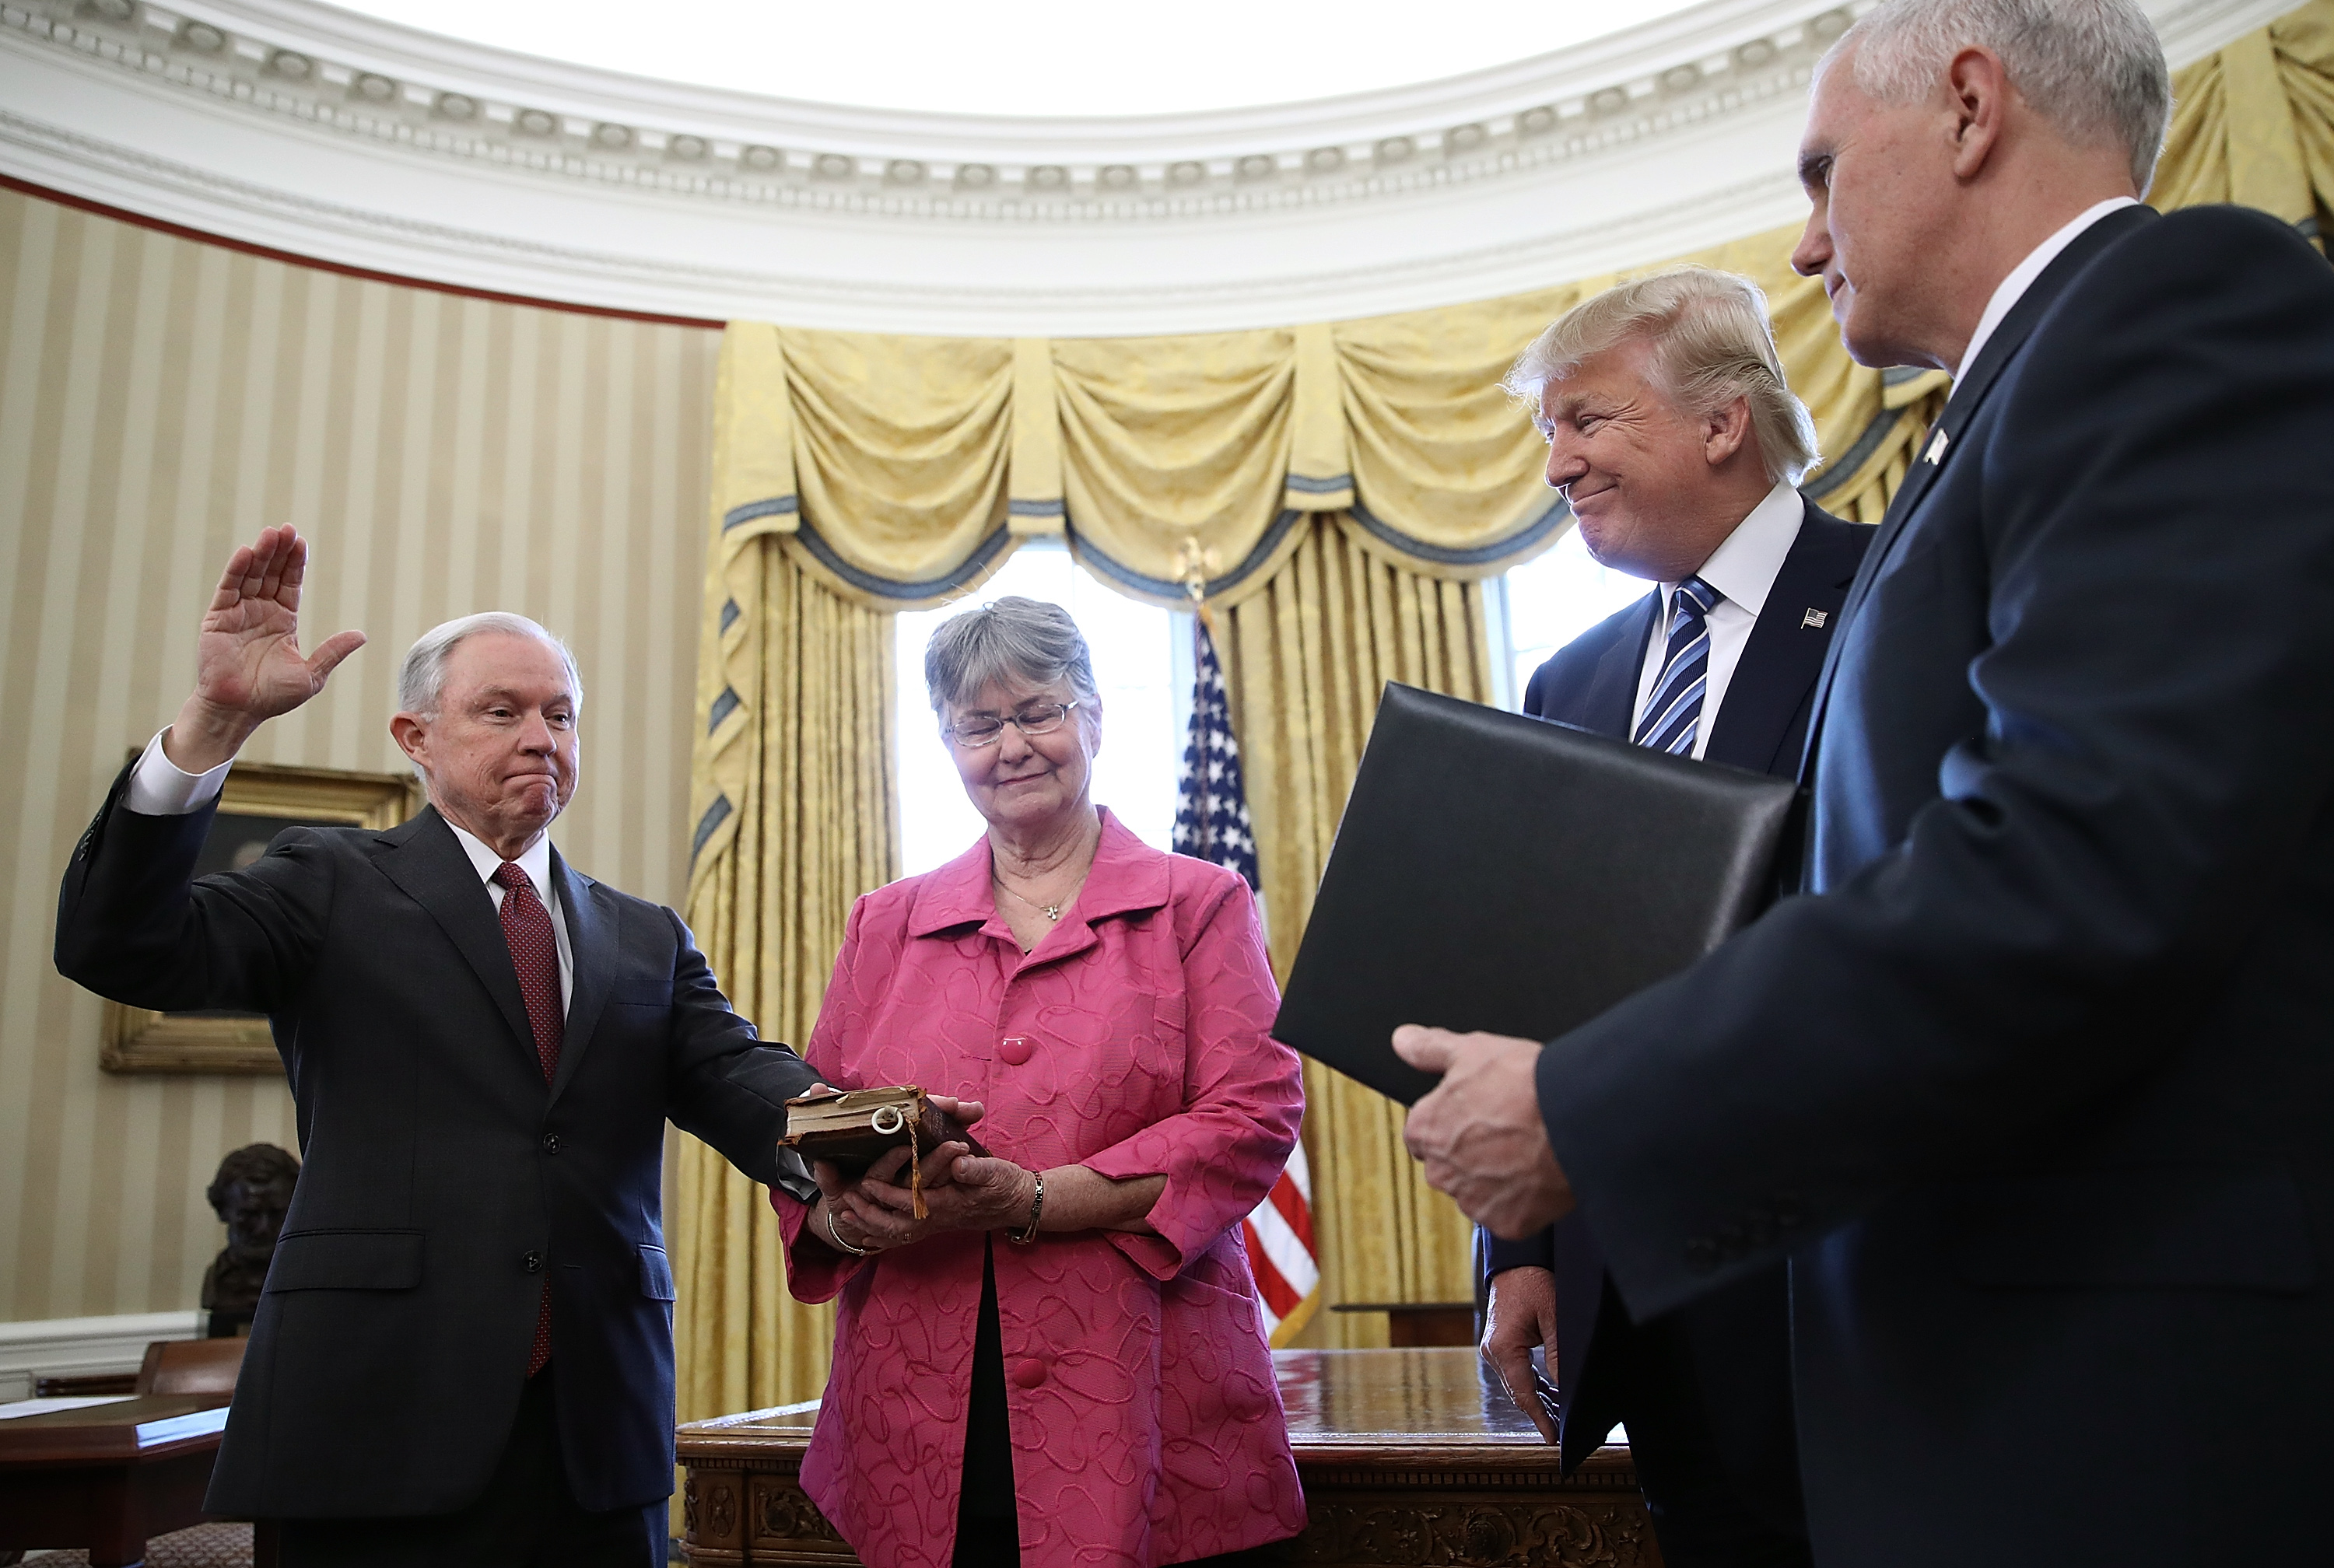 U.S. President Donald Trump (2nd R) watches as Jeff Sessions (L) is sworn in as the new U.S. Attorney General by U.S. Vice President Mike Pence (R) in the Oval Office of the White House February 9, 2017 in Washington, D.C. (Photo by Win McNamee/Getty Images) (Win McNamee&mdash;Getty Images)